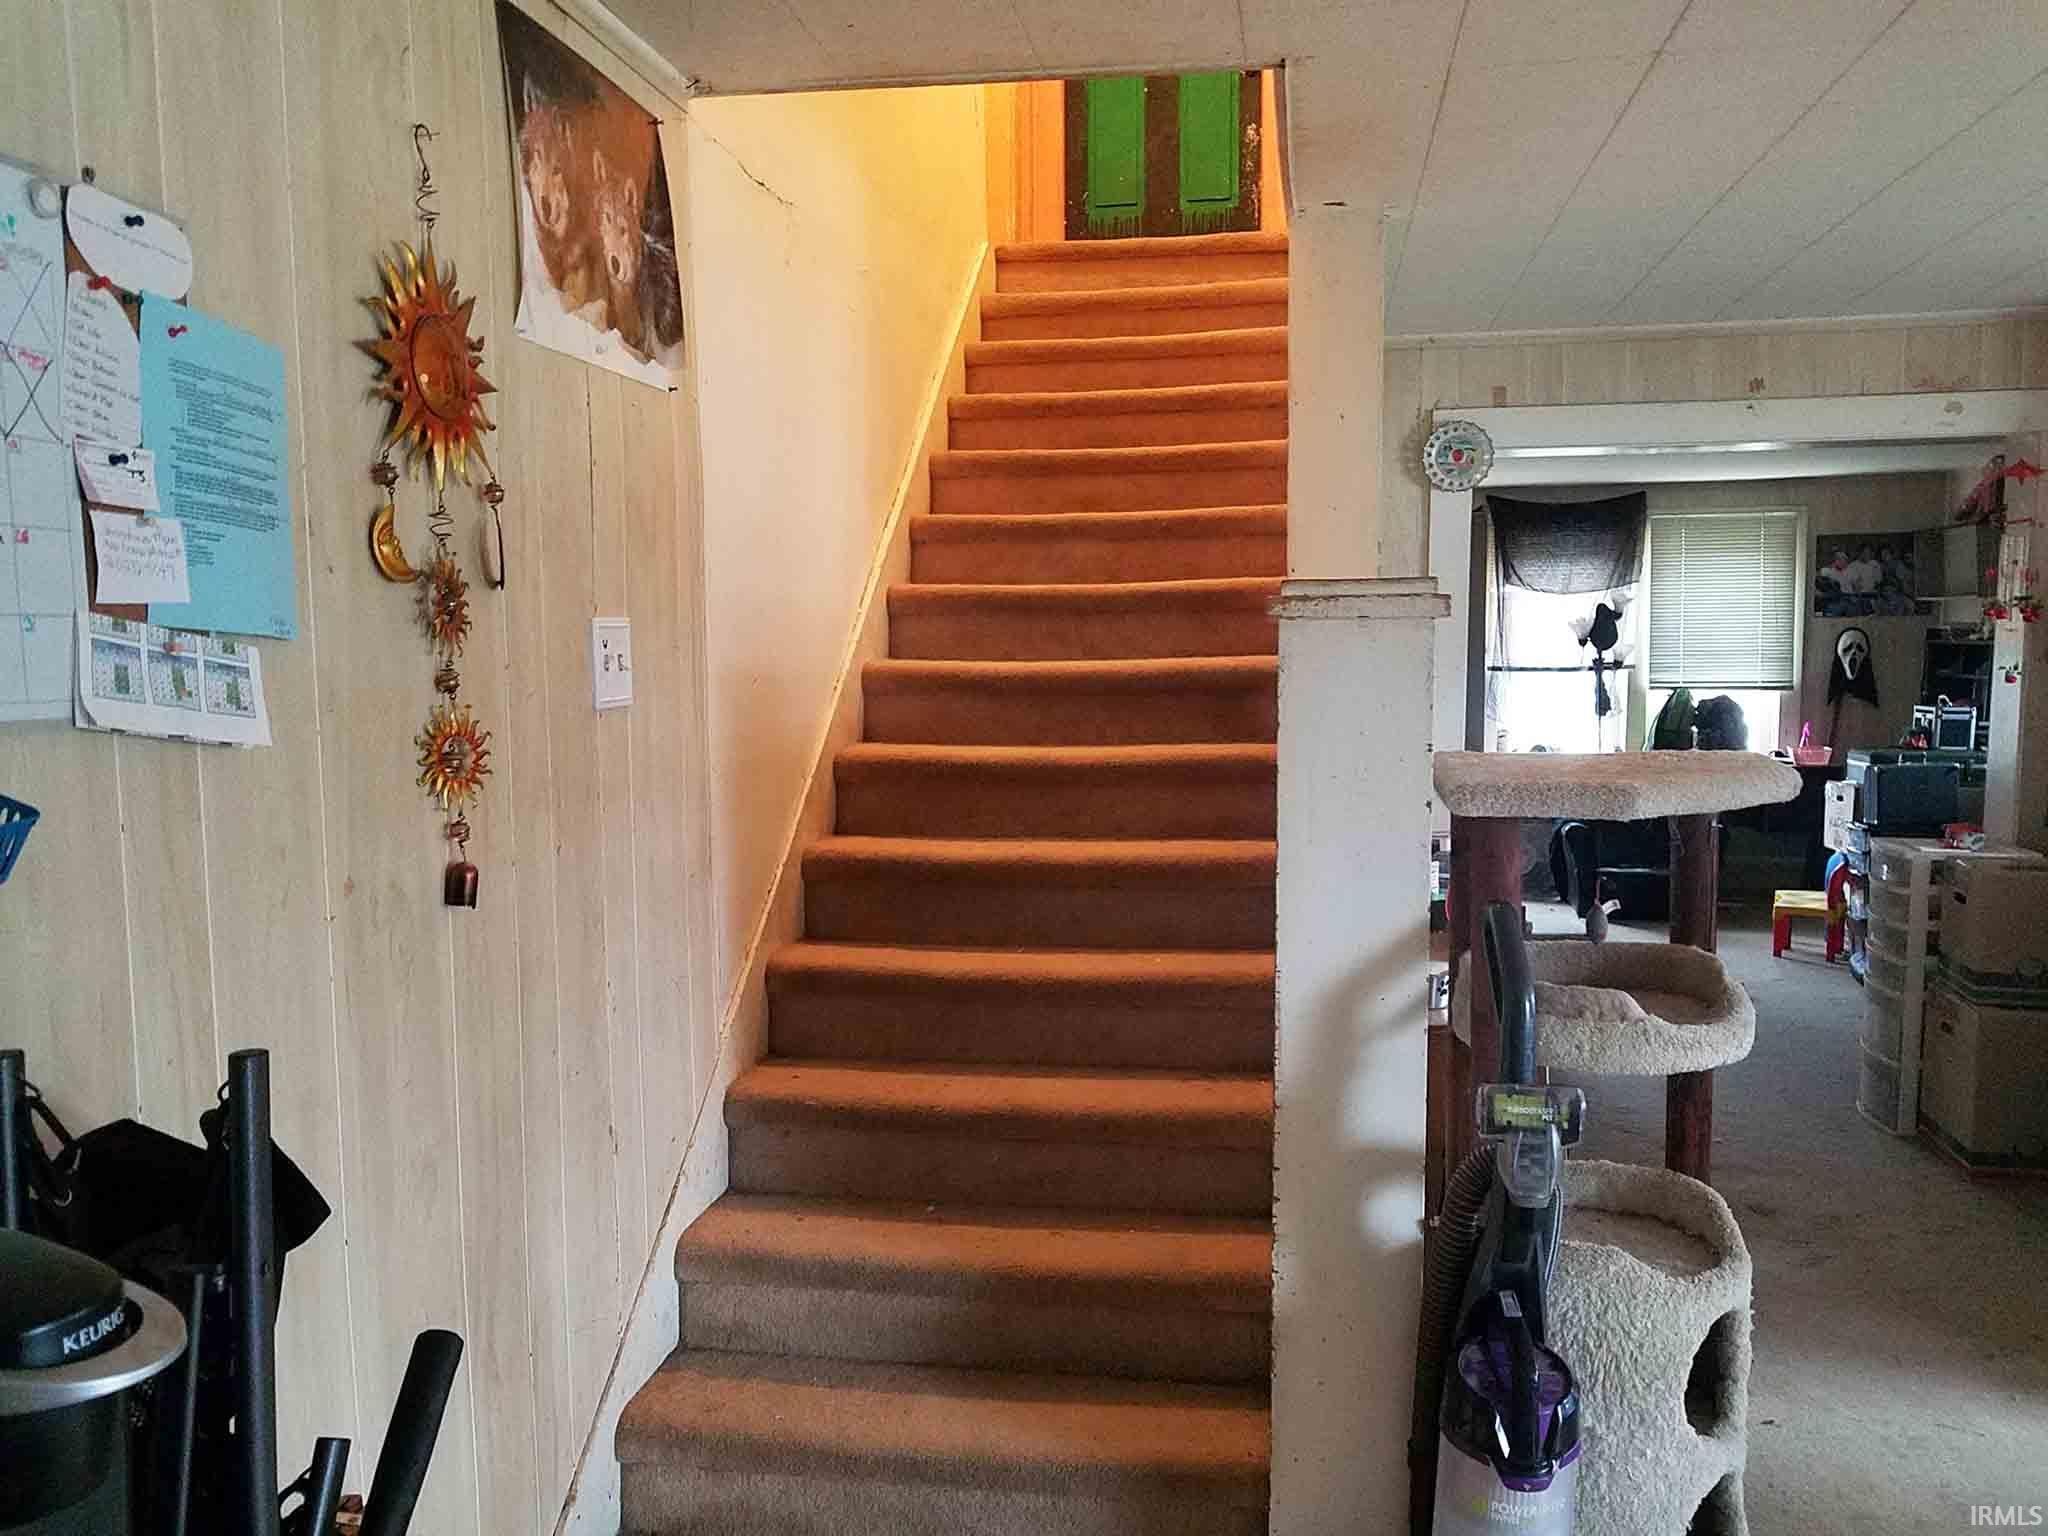 Stairs leading to bedrooms.